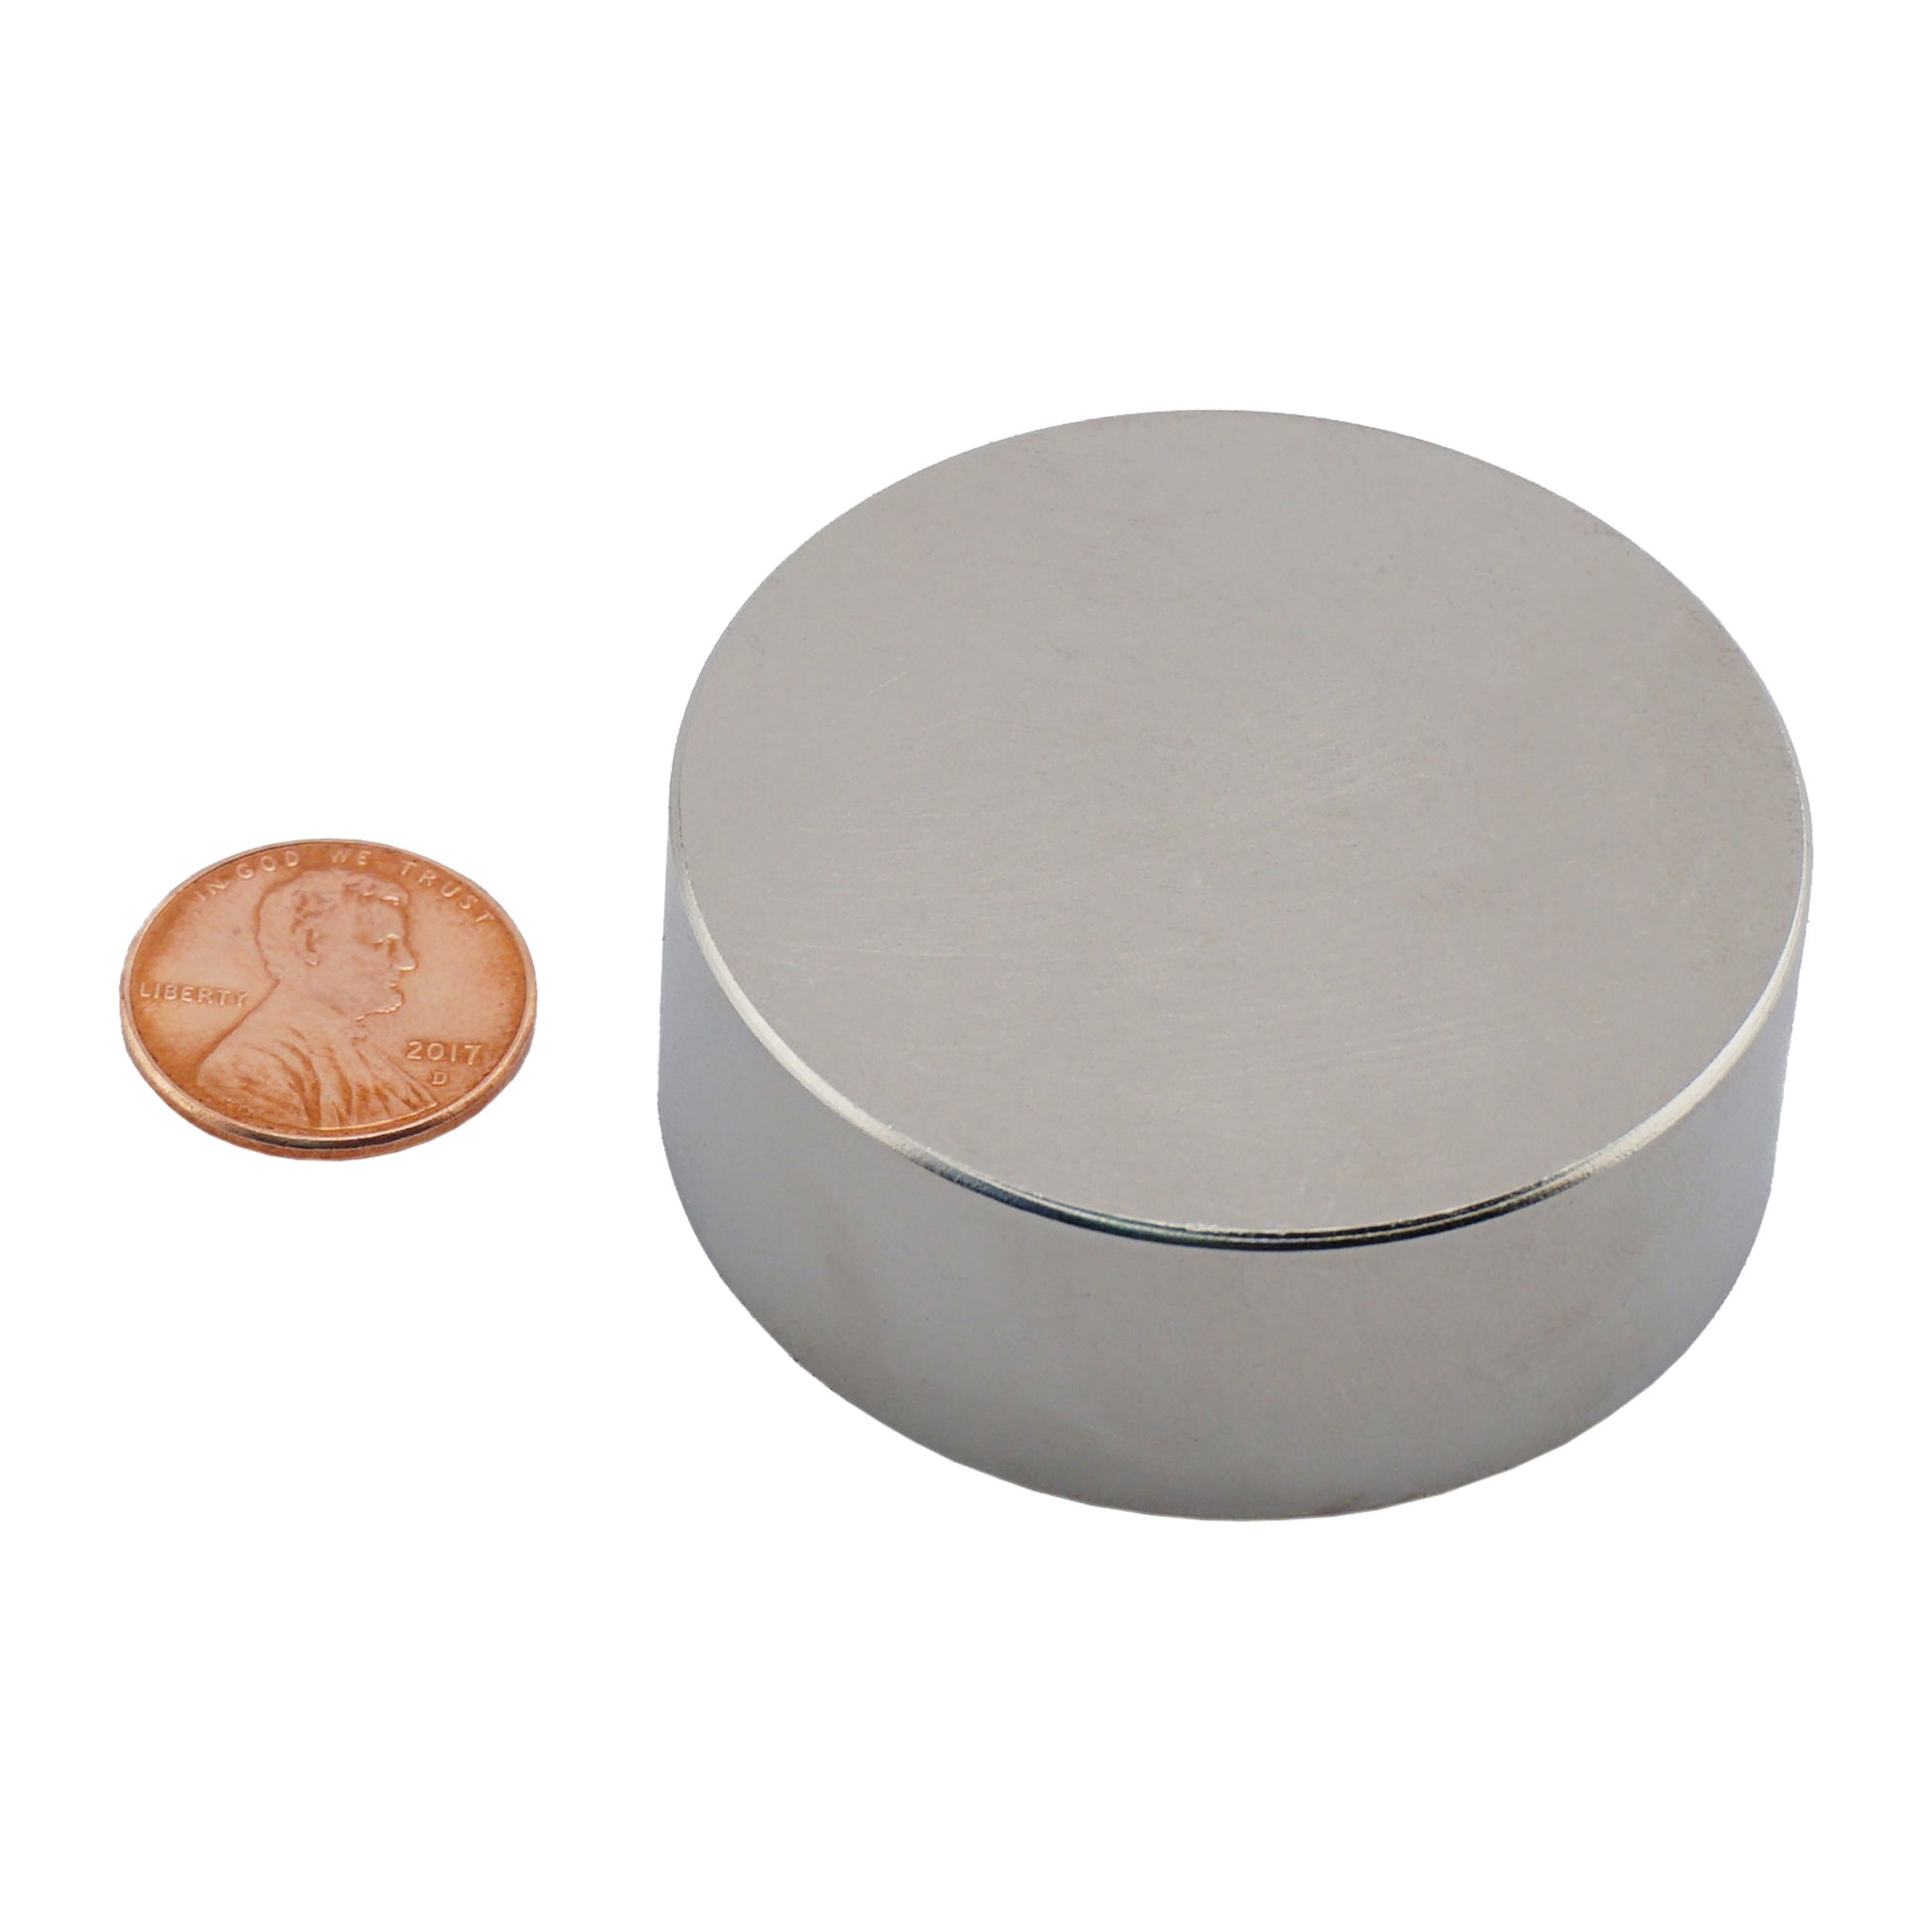 Load image into Gallery viewer, ND020010N Neodymium Disc Magnet - Compared to Penny for Size Reference